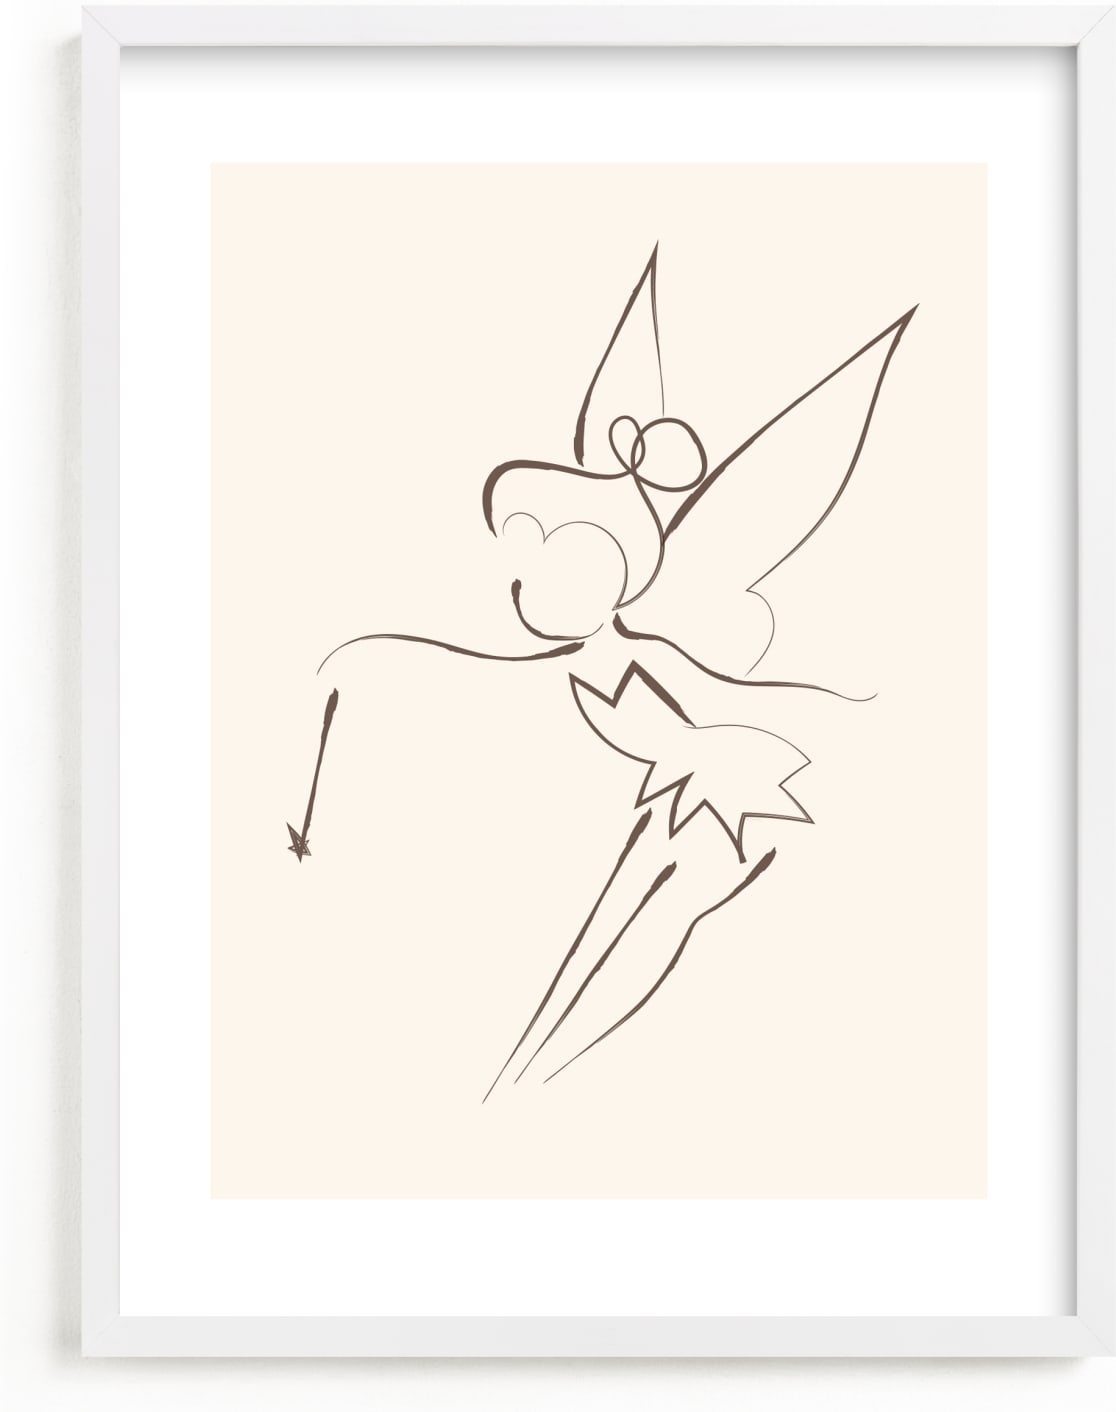 This is a brown disney art by Teju Reval called Disney's Tinkerbell Magic.